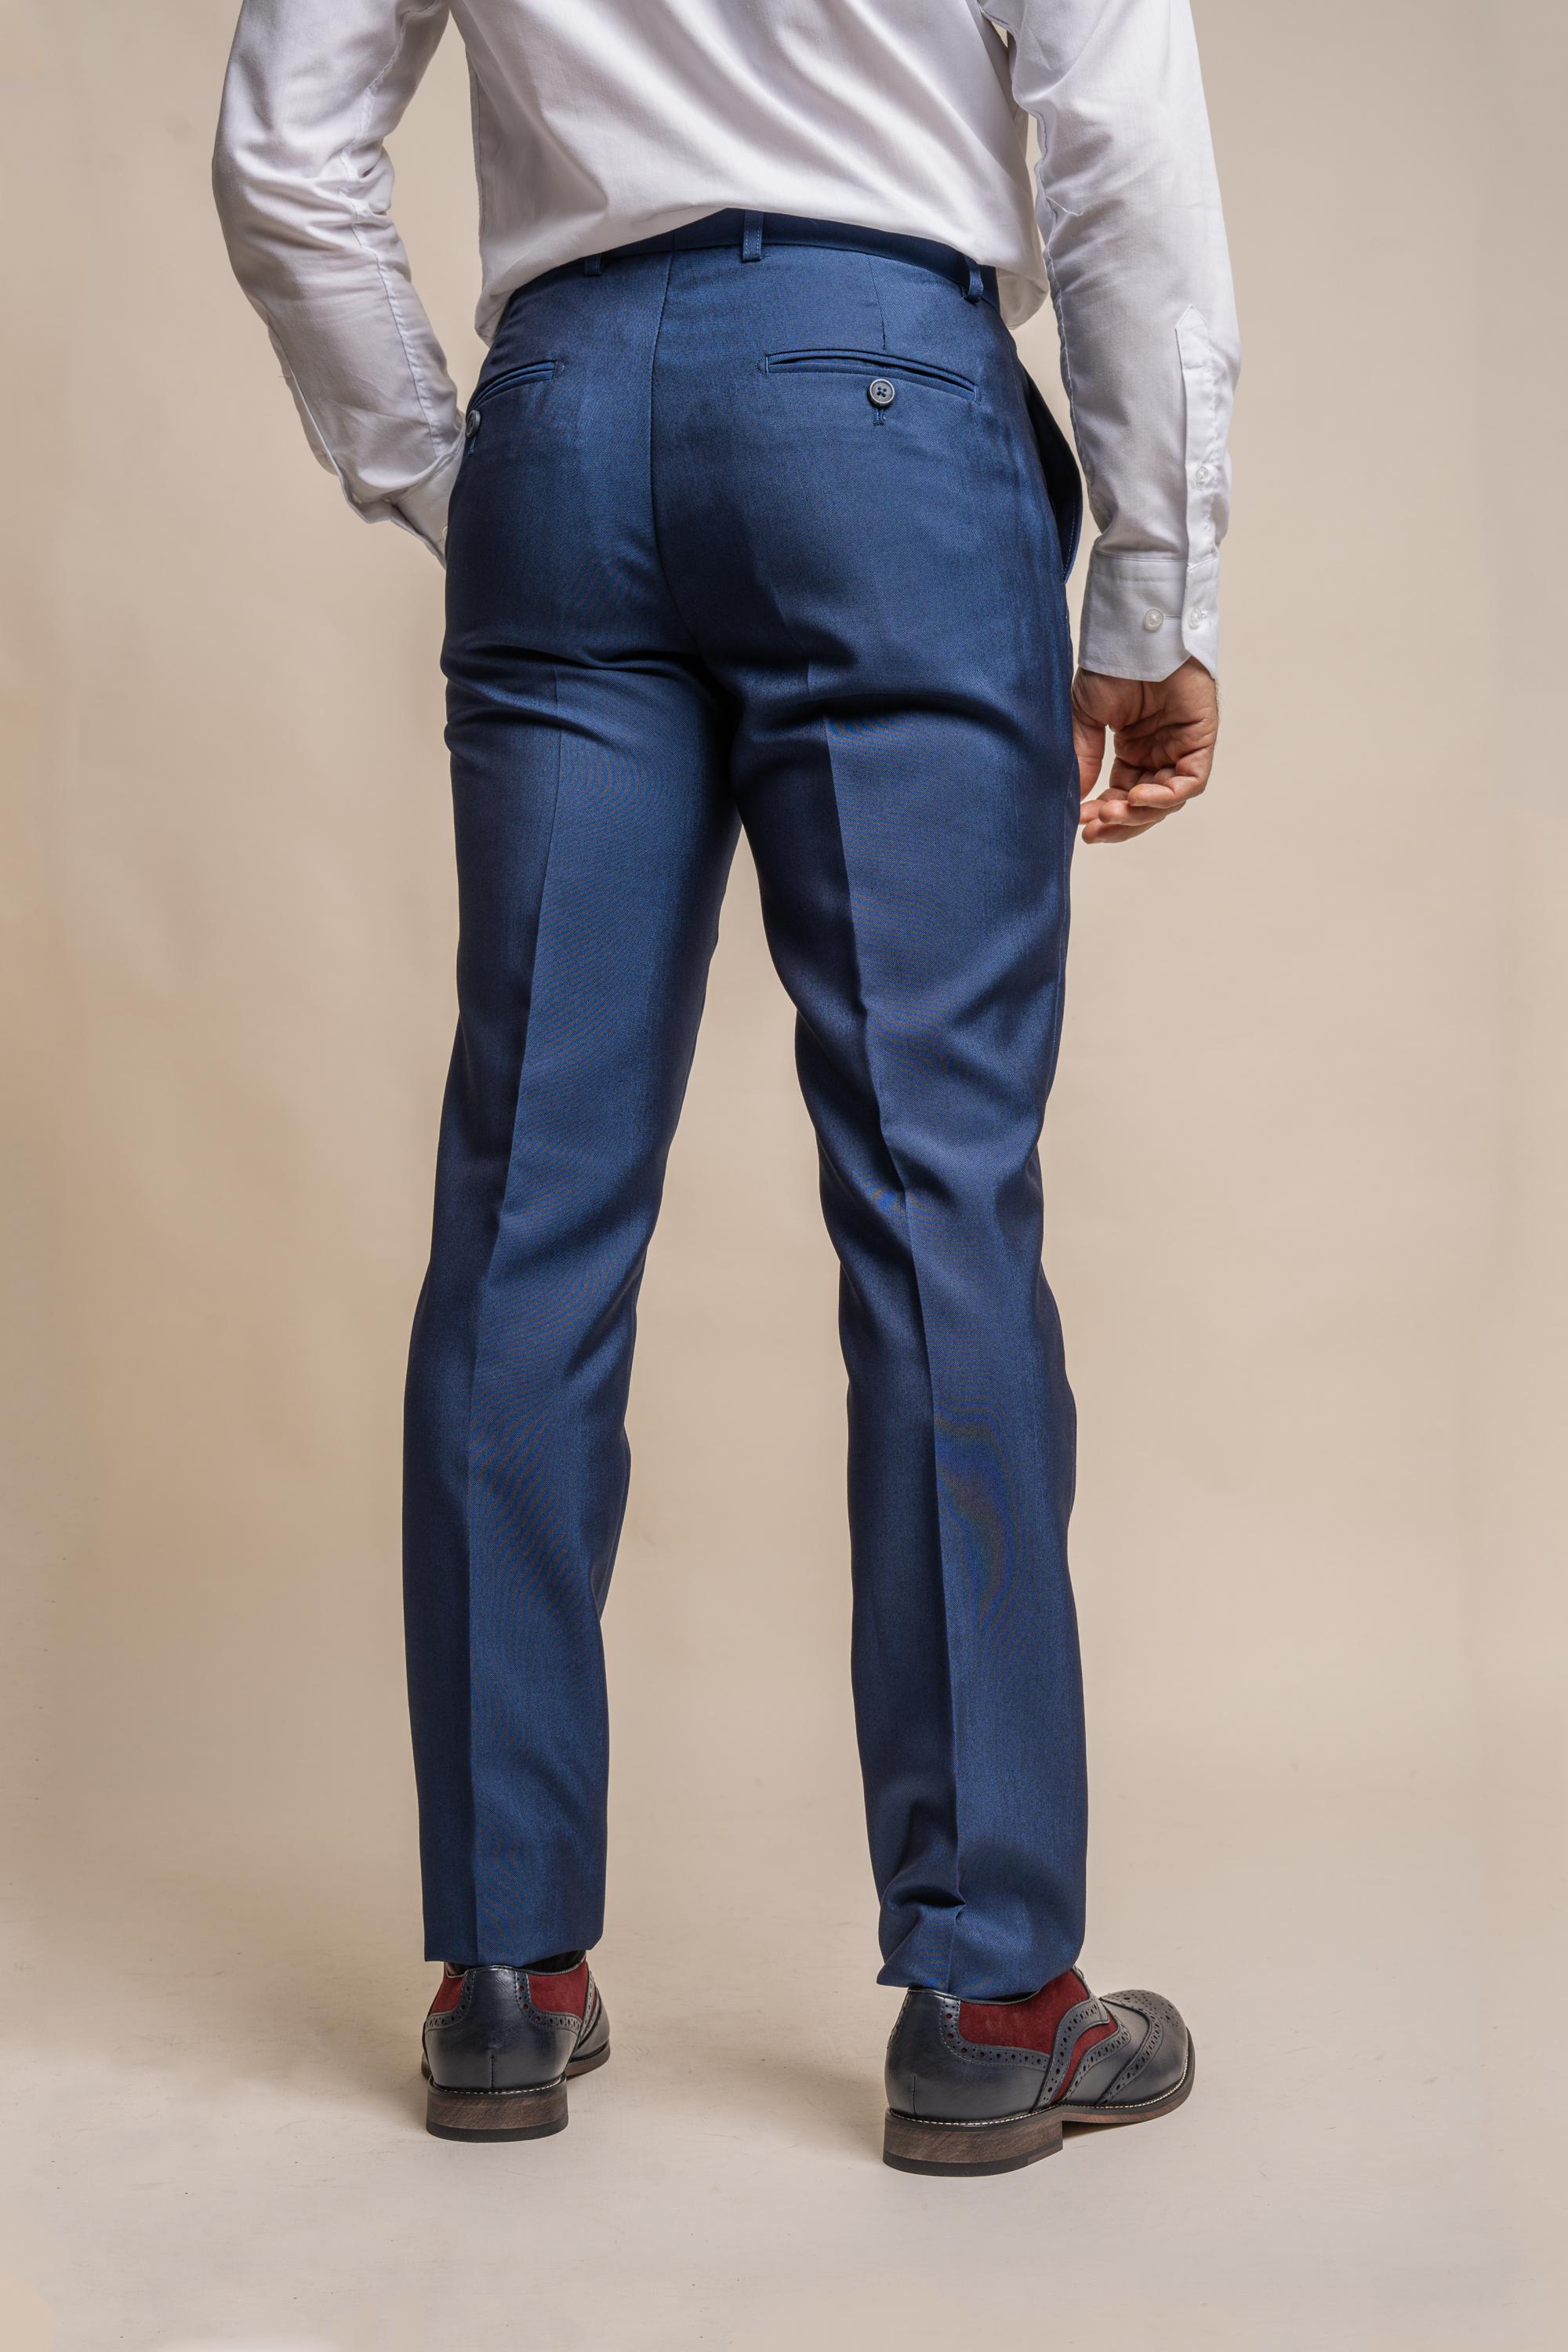 Men's Slim Fit Formal Royal Blue Trousers - FORD